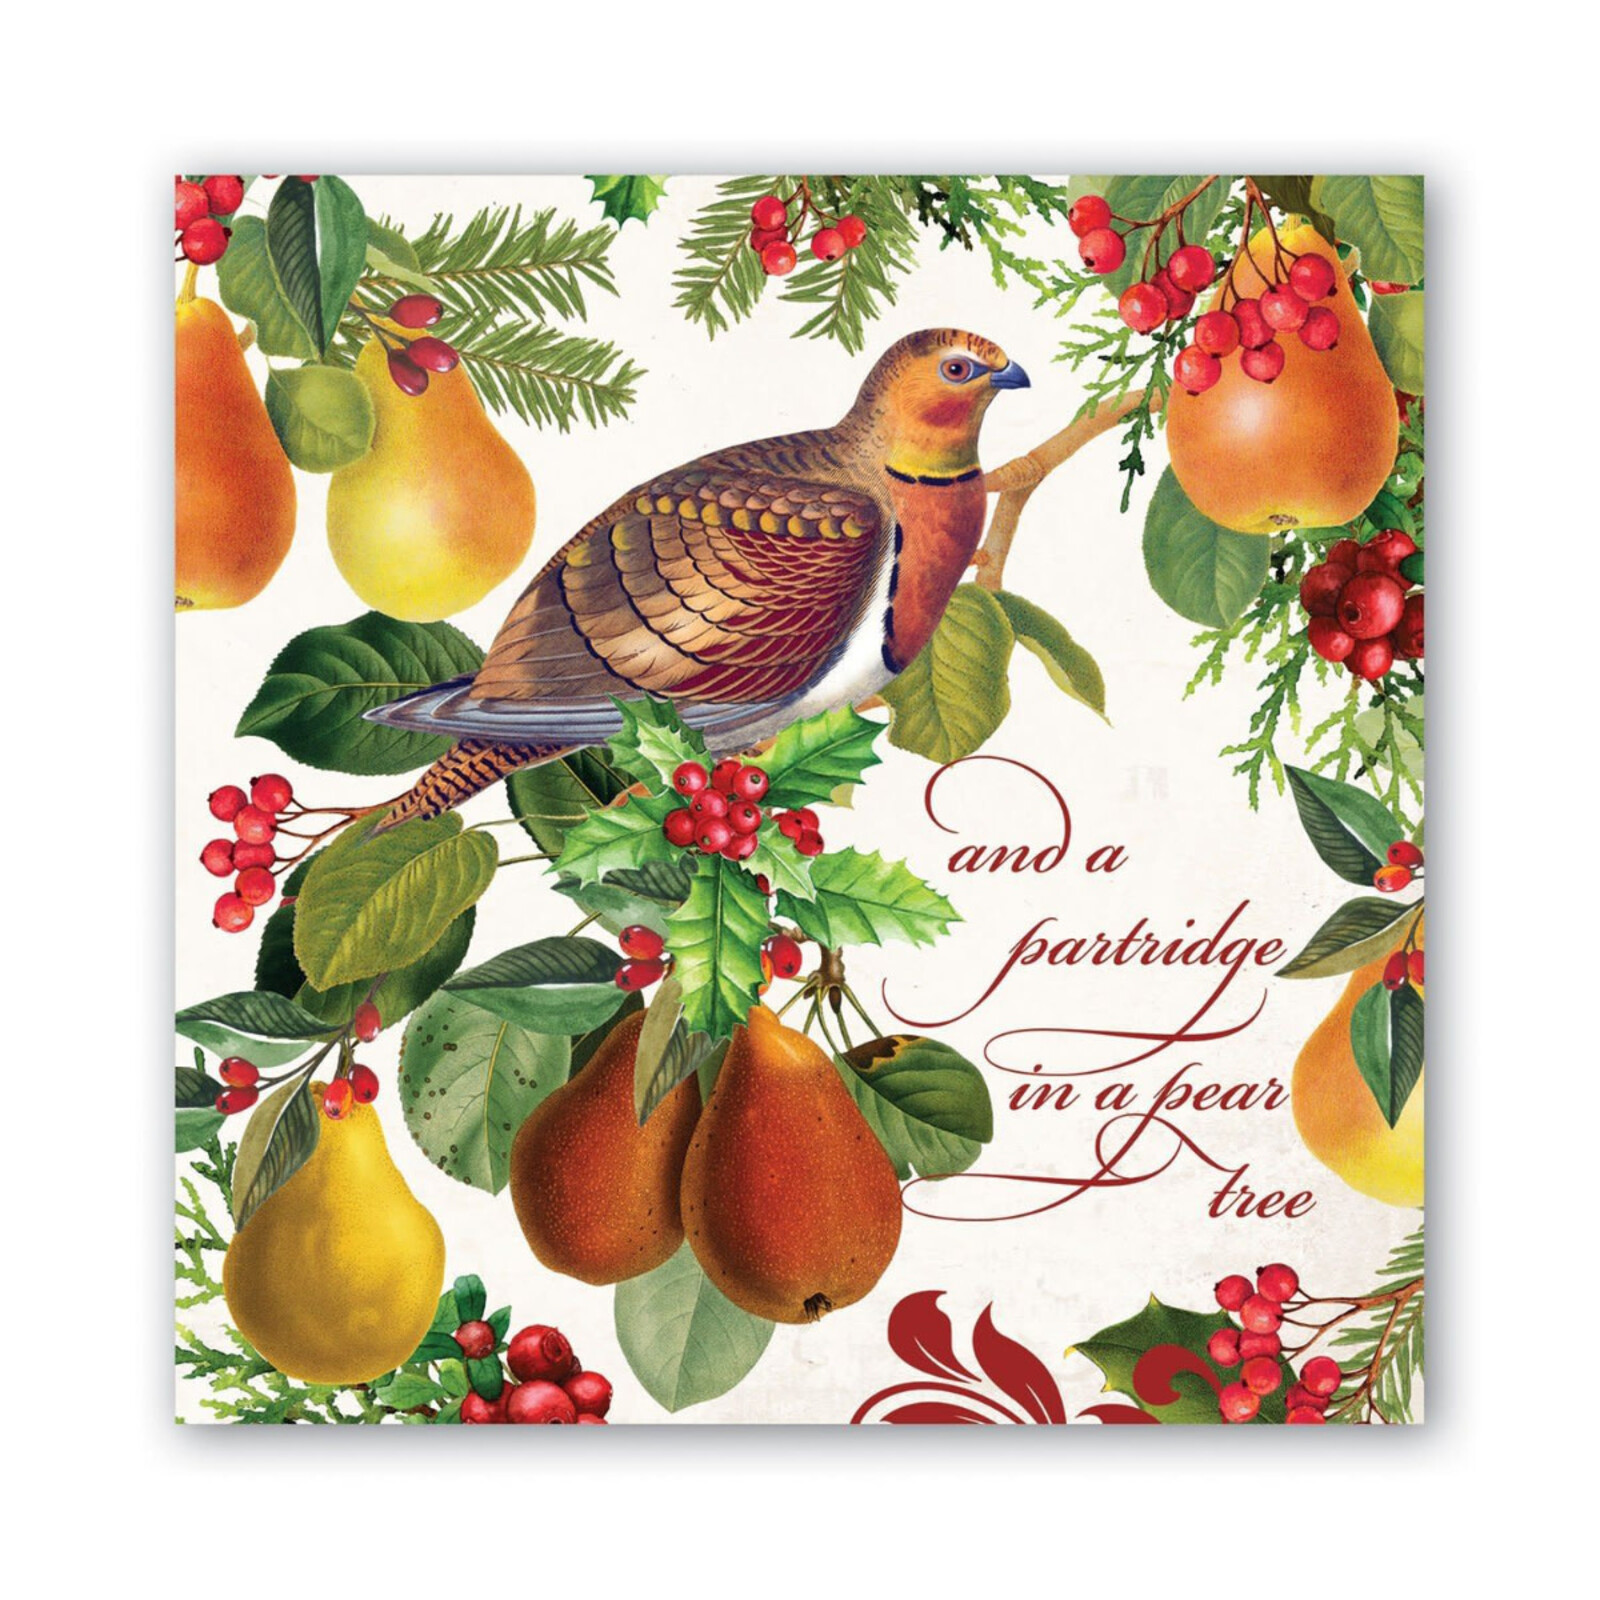 Michel Design Works In a Pear Tree Luncheon Napkin    NAPL345 loading=